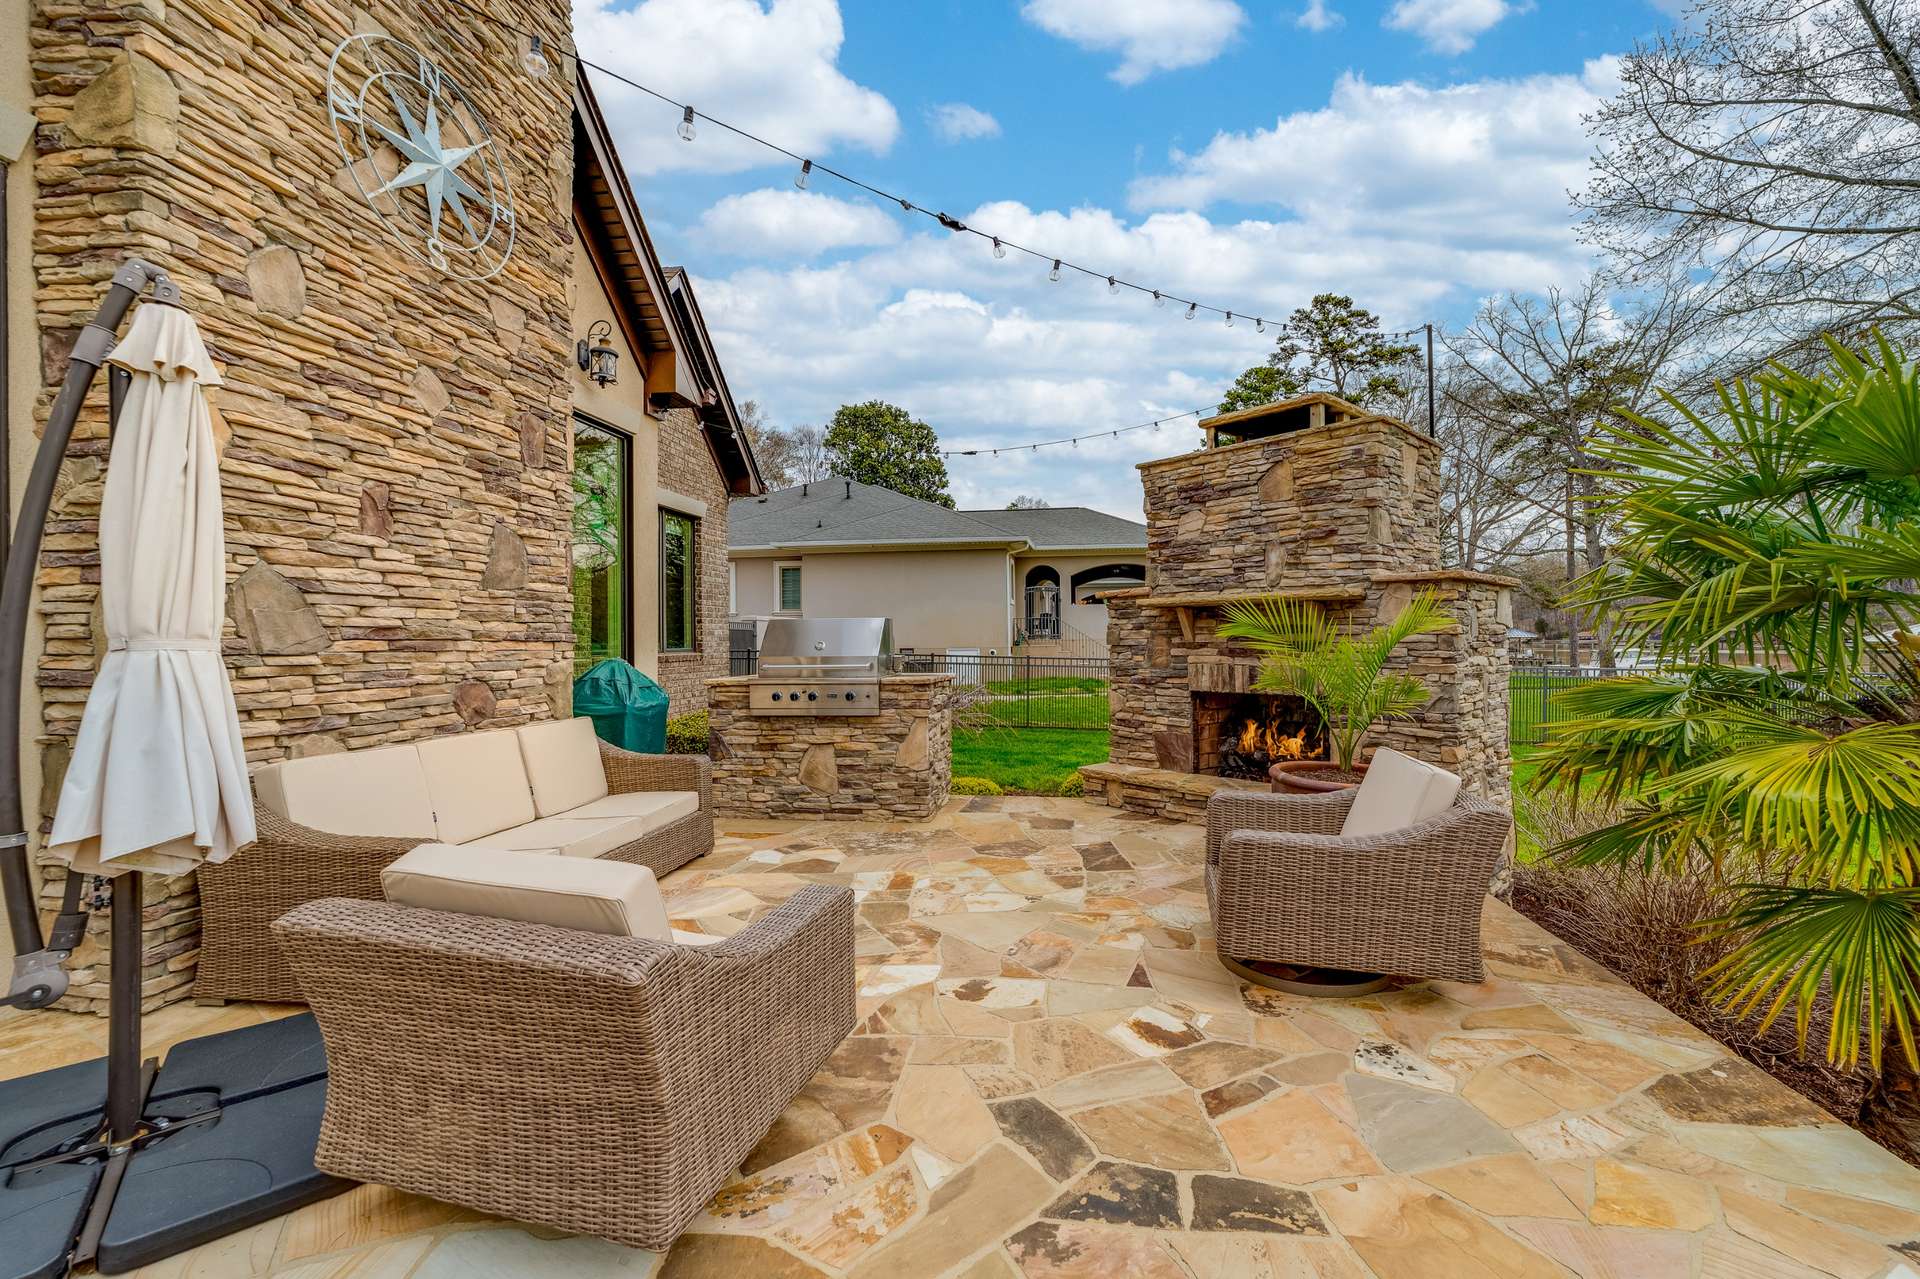 52 of 79. Exterior Day Time Photo - 846 Armstrong Rd - Showcasing Back Patio, featuring a stacked stone wood burning fireplace, built in Viking Grille overlooking backyard and lake